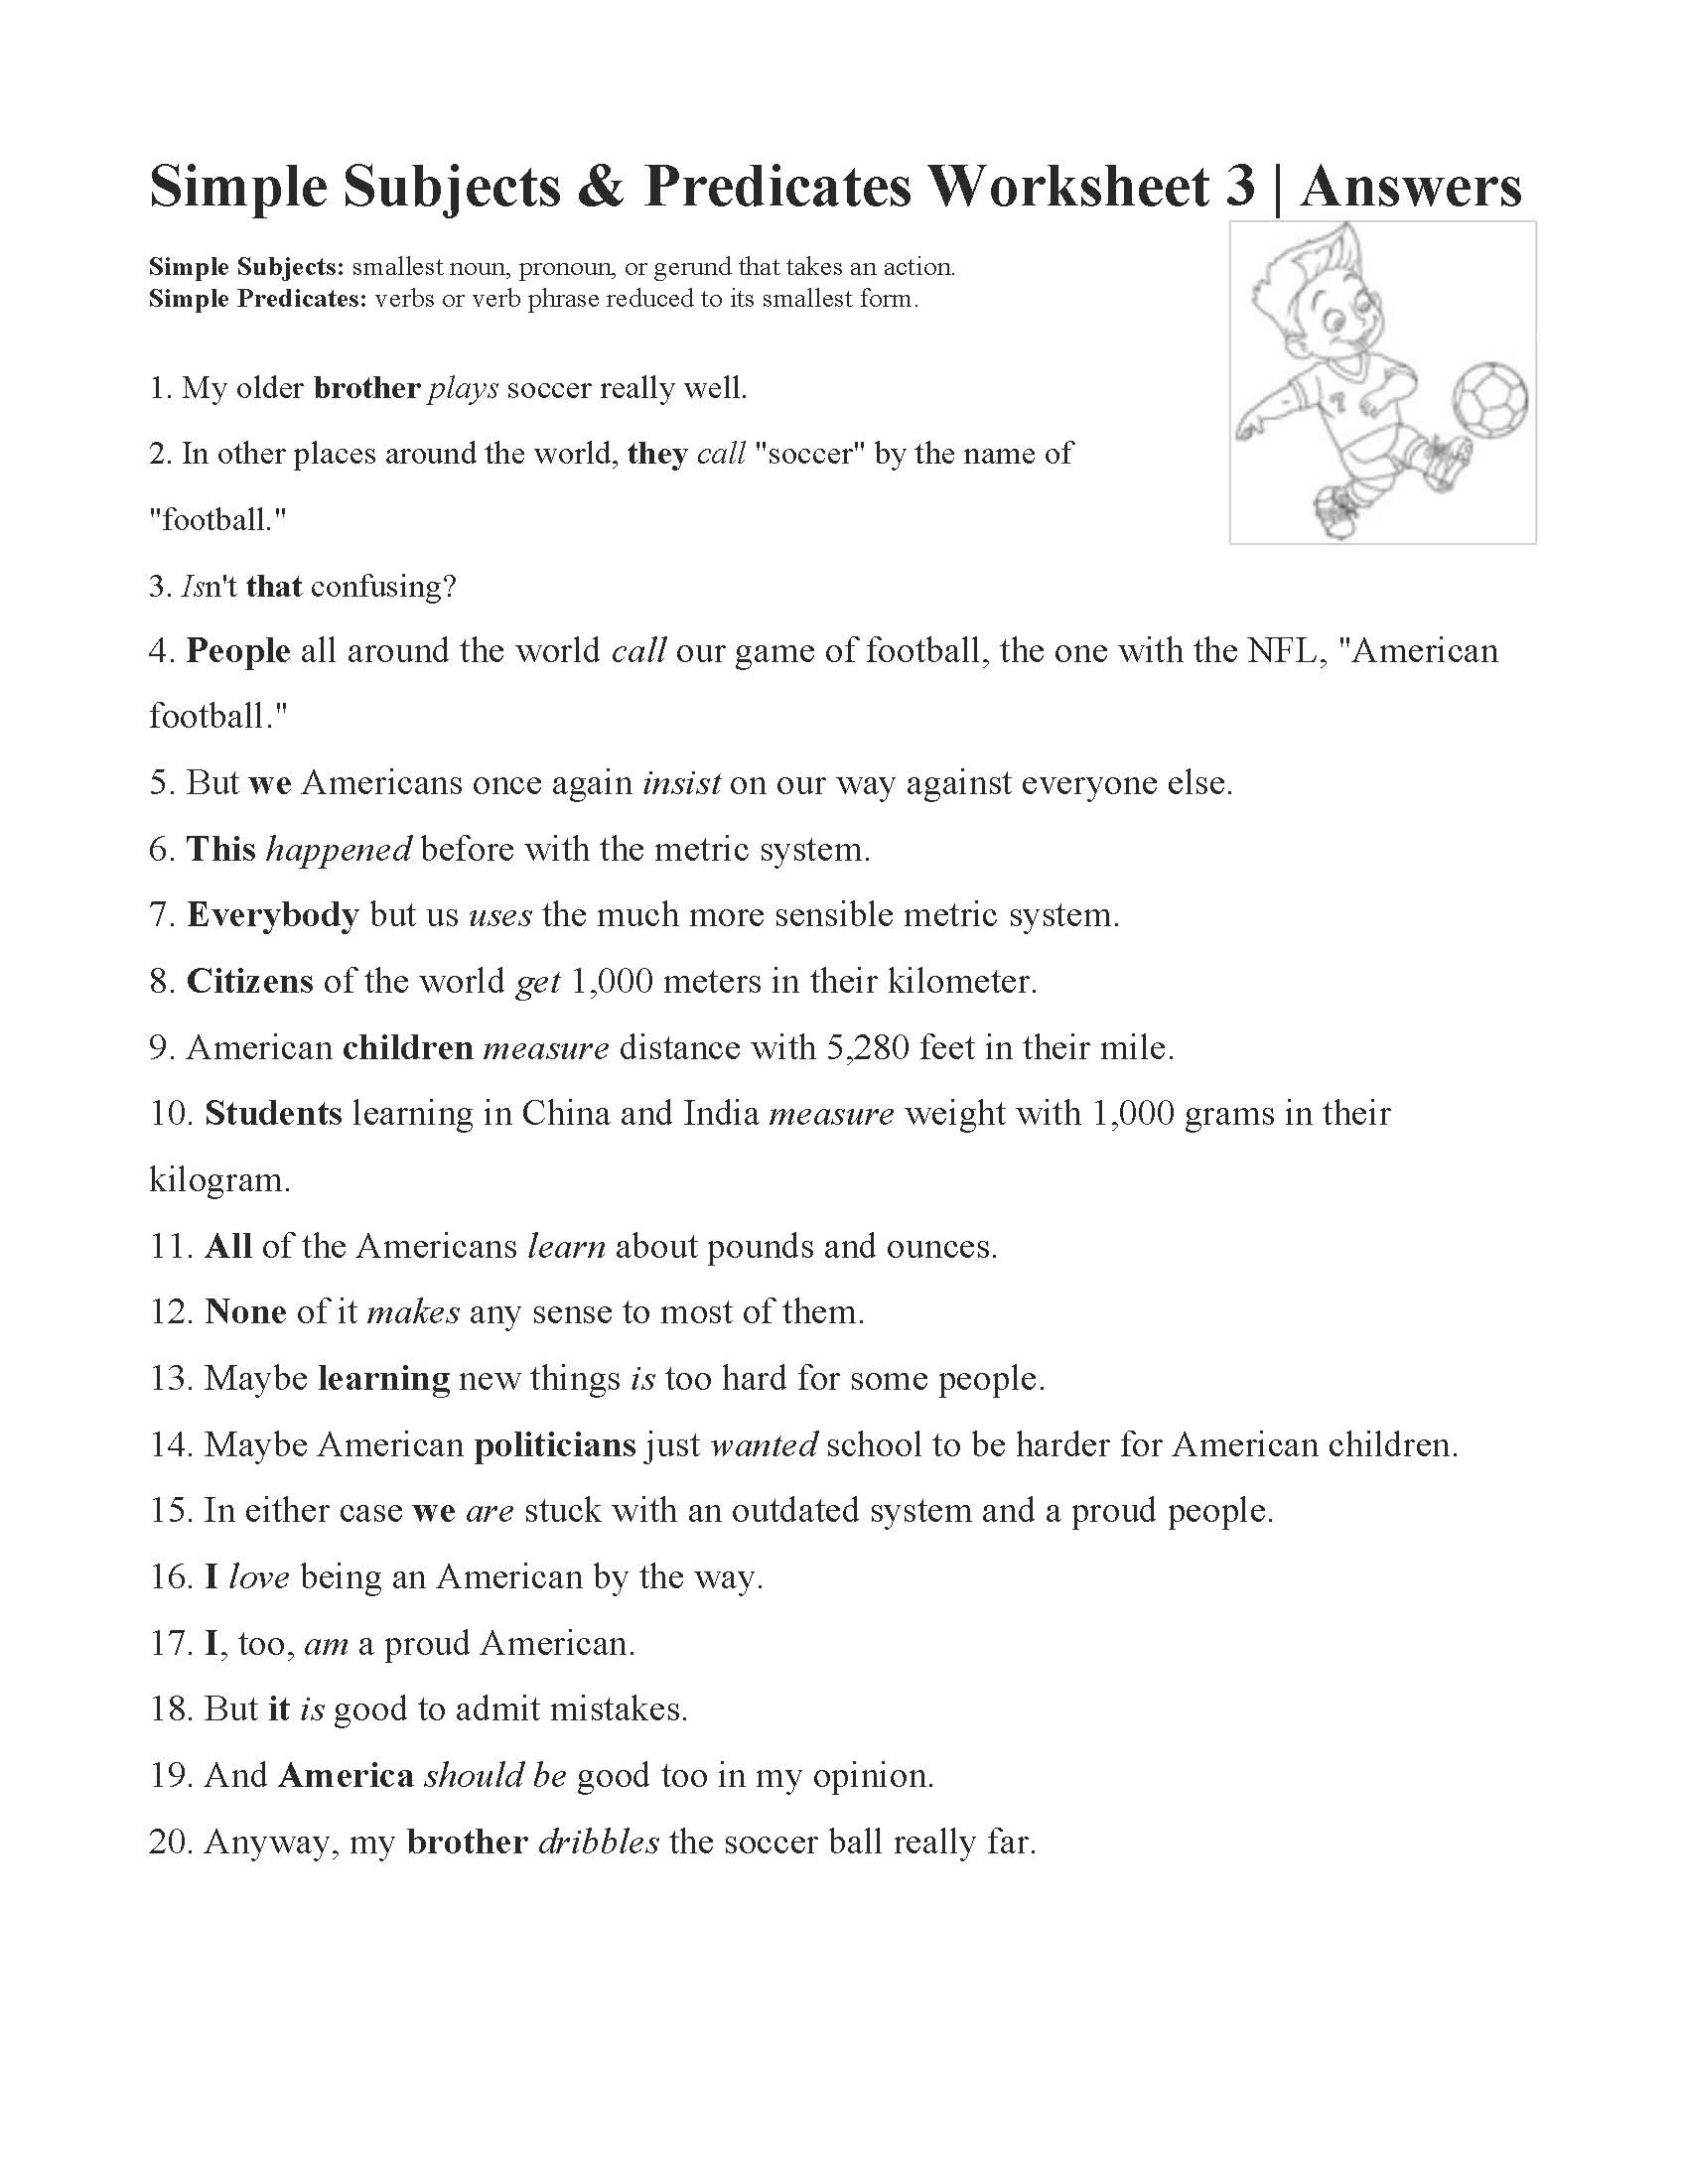 Simple Subjects and Predicates Worksheet 20  Answers For Subjects And Predicates Worksheet